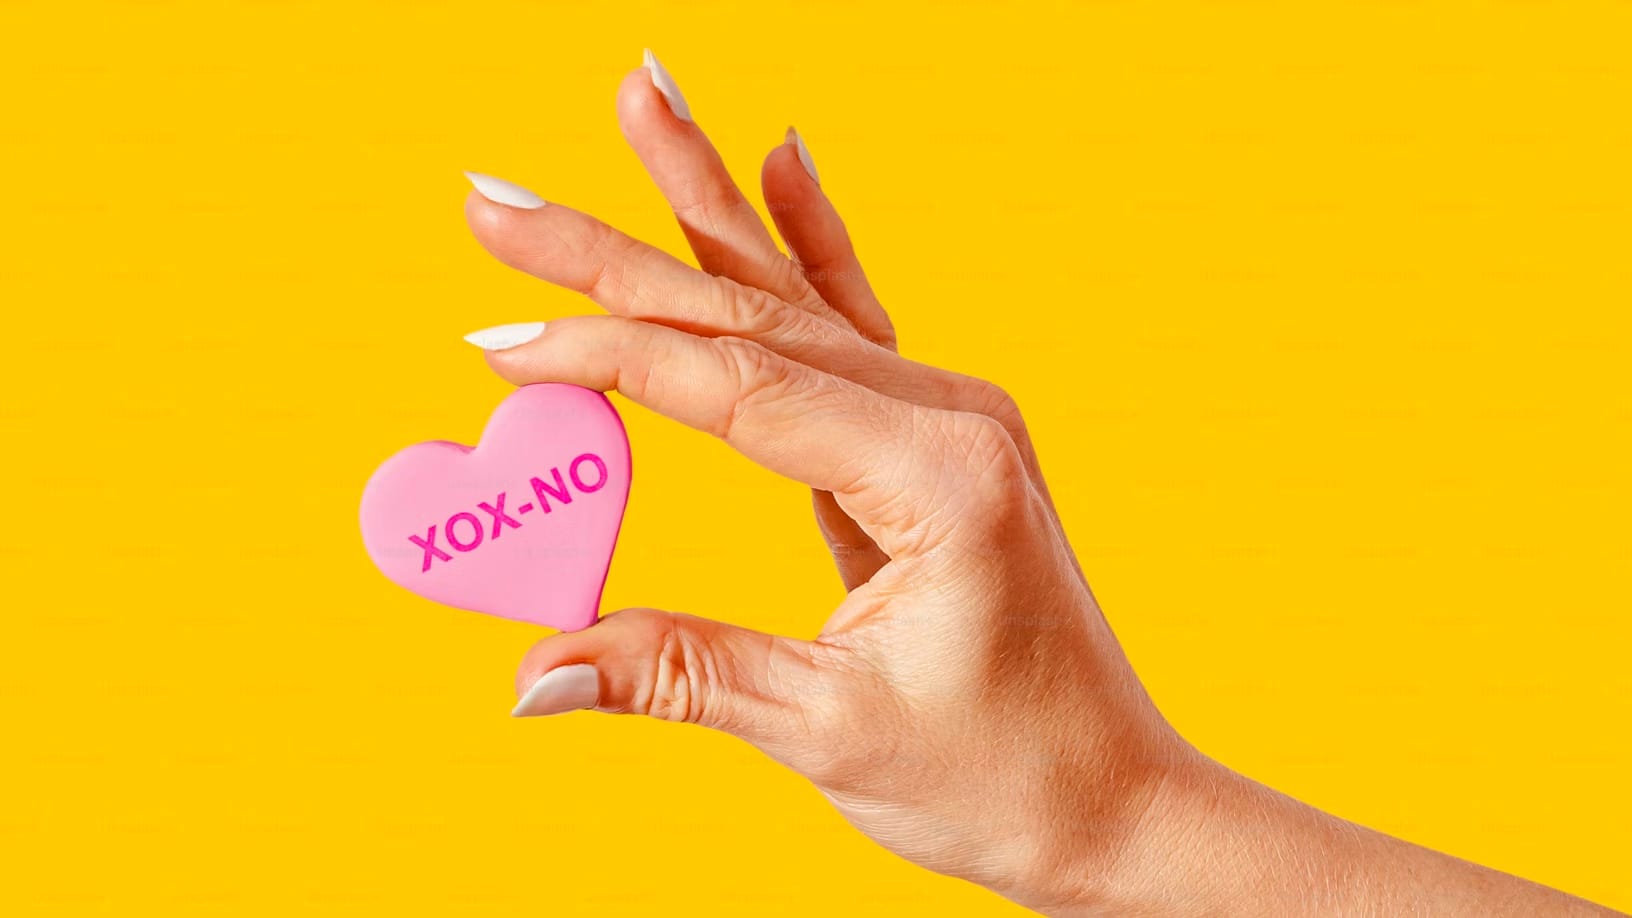 A woman's hand holding a heart-shaped Valentine's cookie that reads "xox-no"